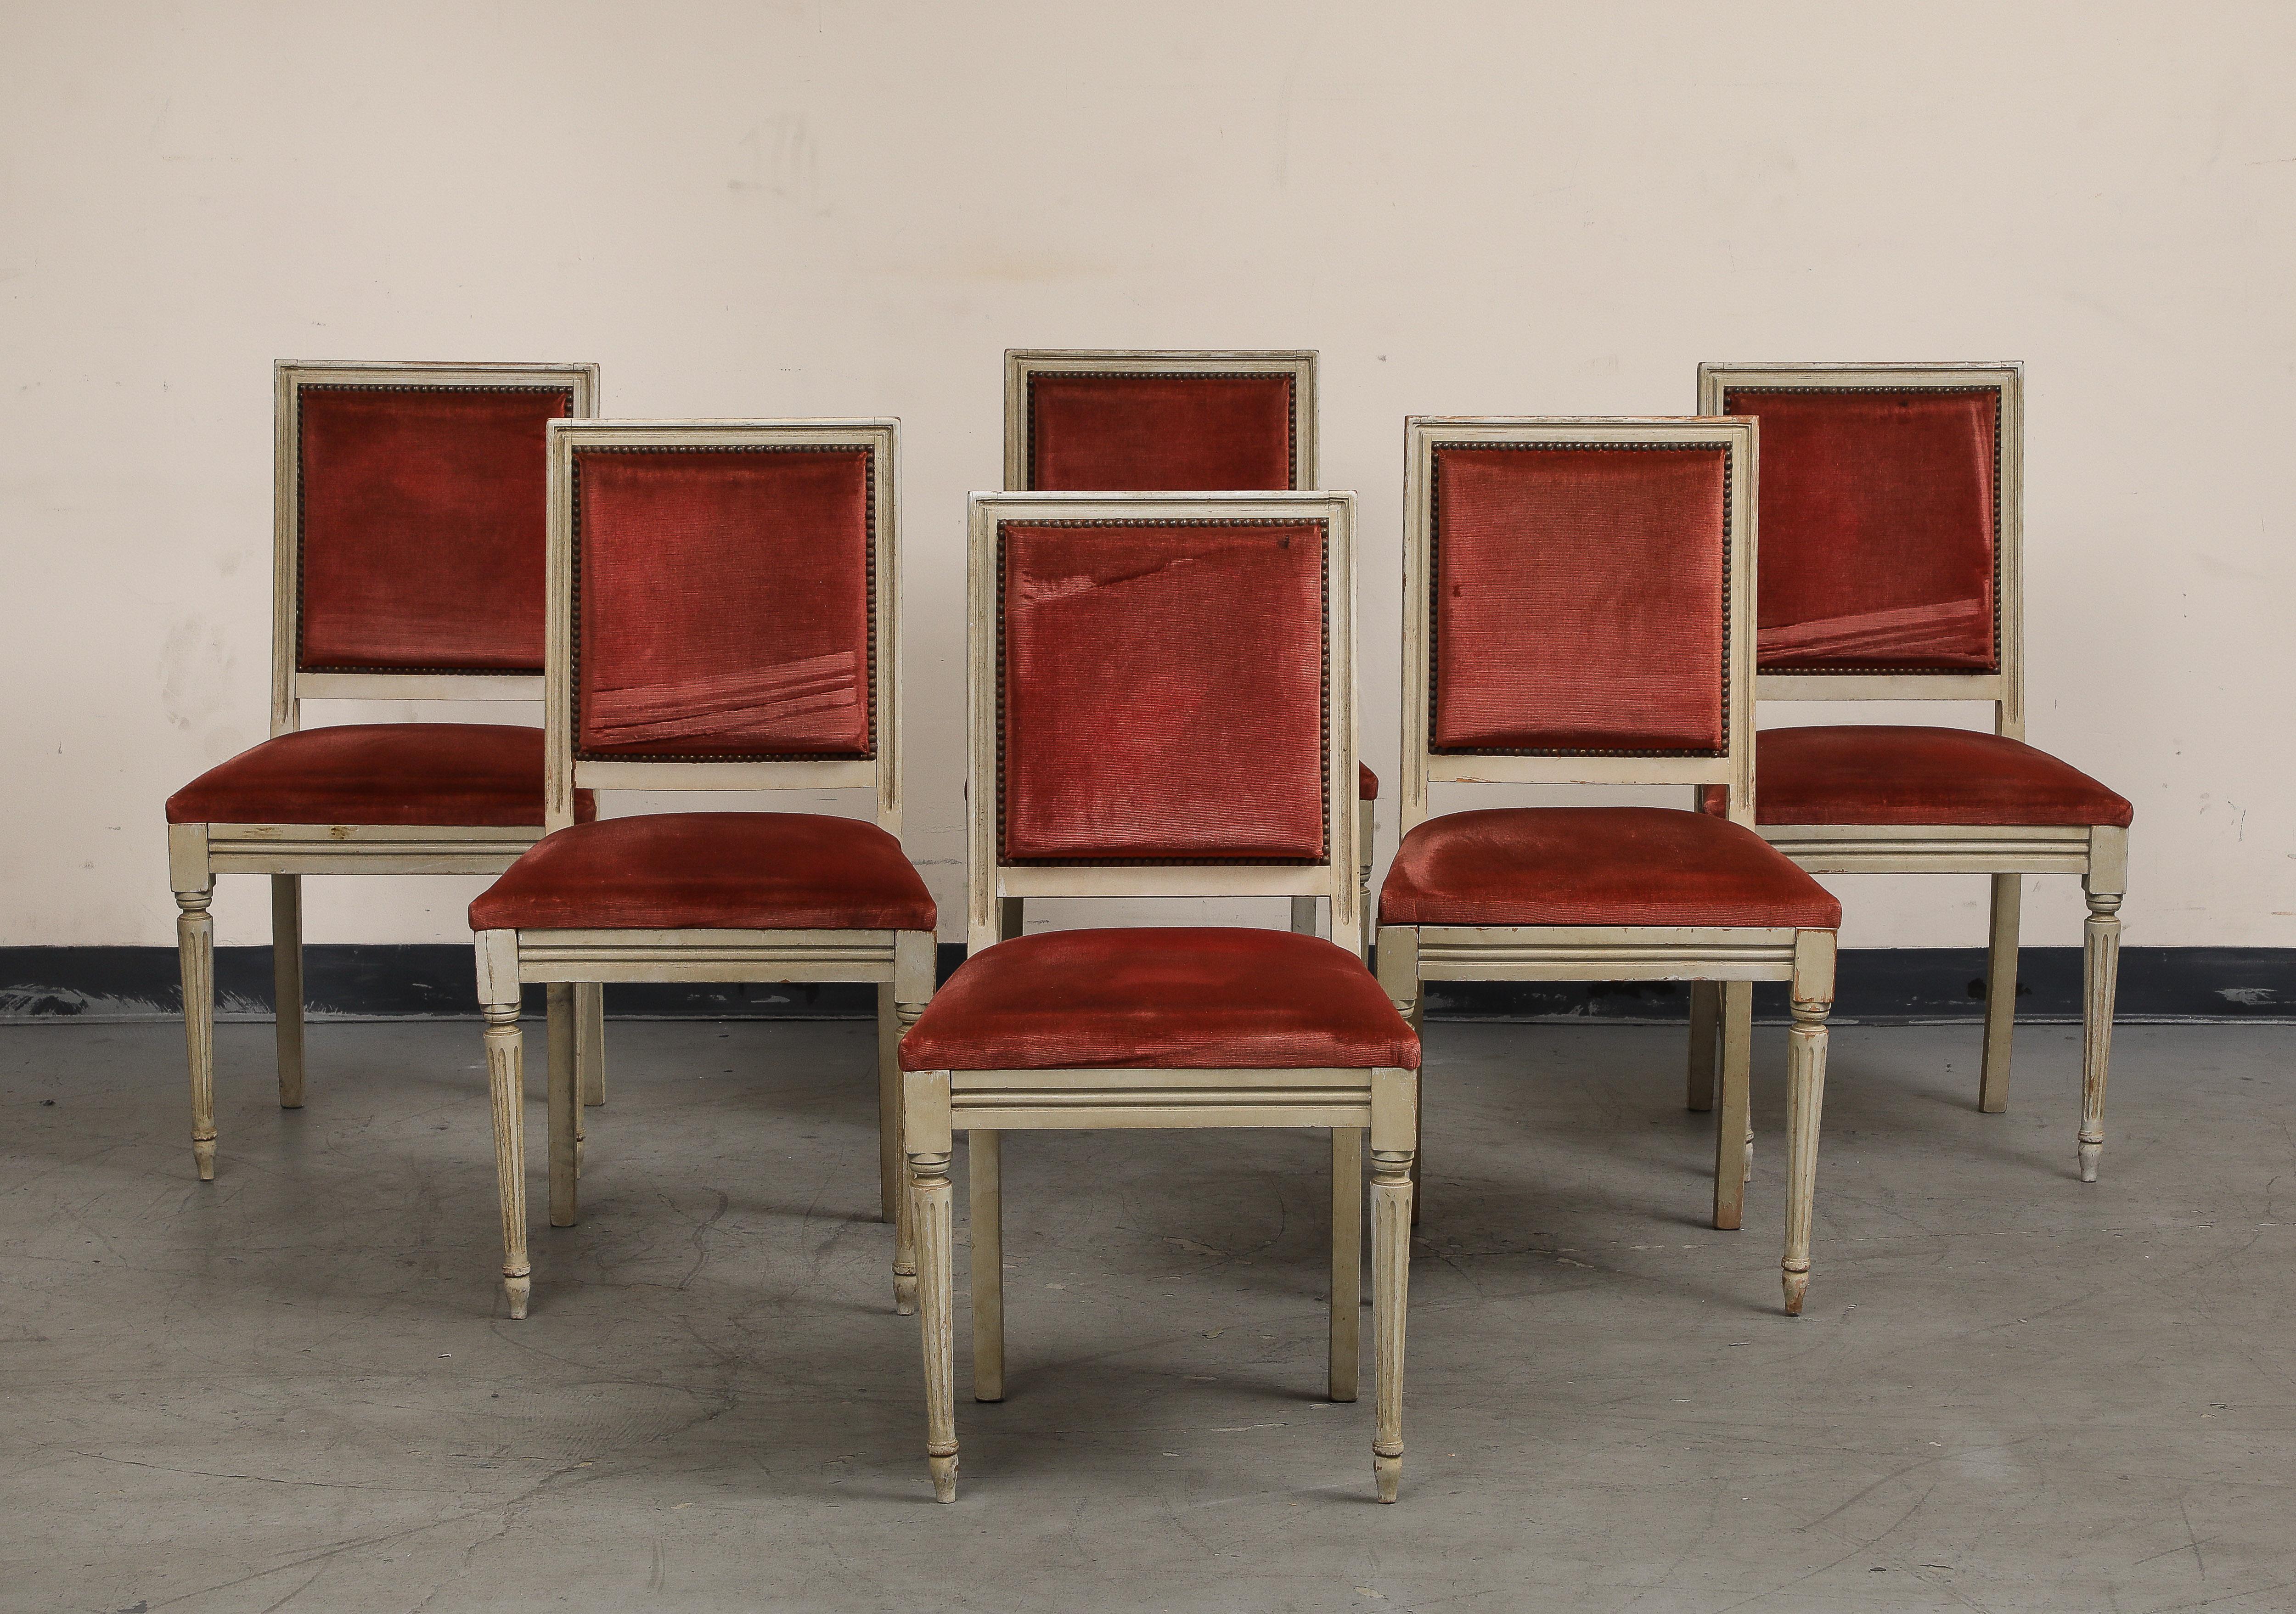 Set of six (6) early 20th century French Louis XVI style painted side chairs. Original paint/distressed finish on frames with fluted and tapered legs. Seat and back in red ribbed velvet upholstery and bronze nail head trim. 

